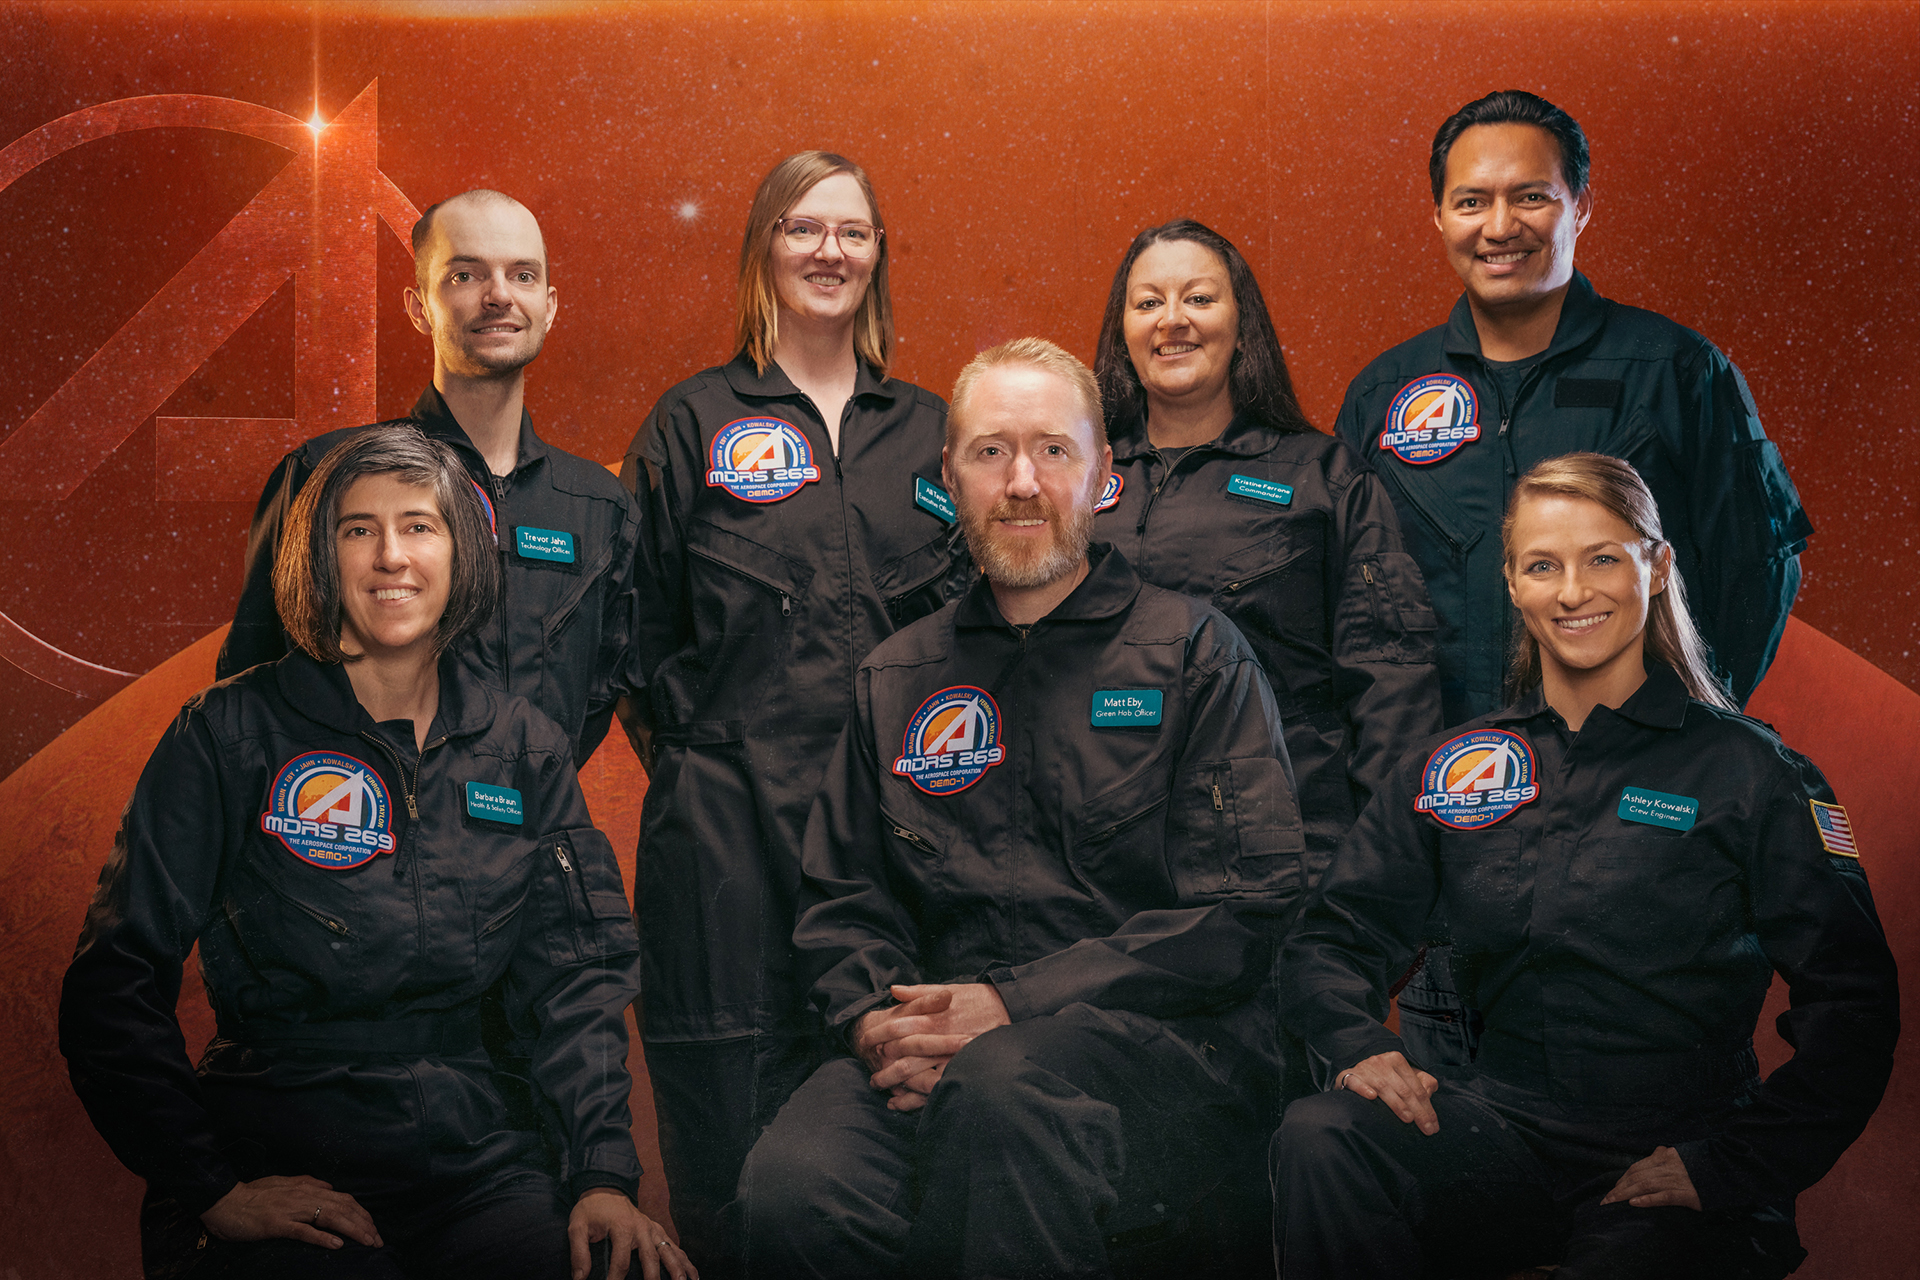 Seven people pose in space jumpsuits